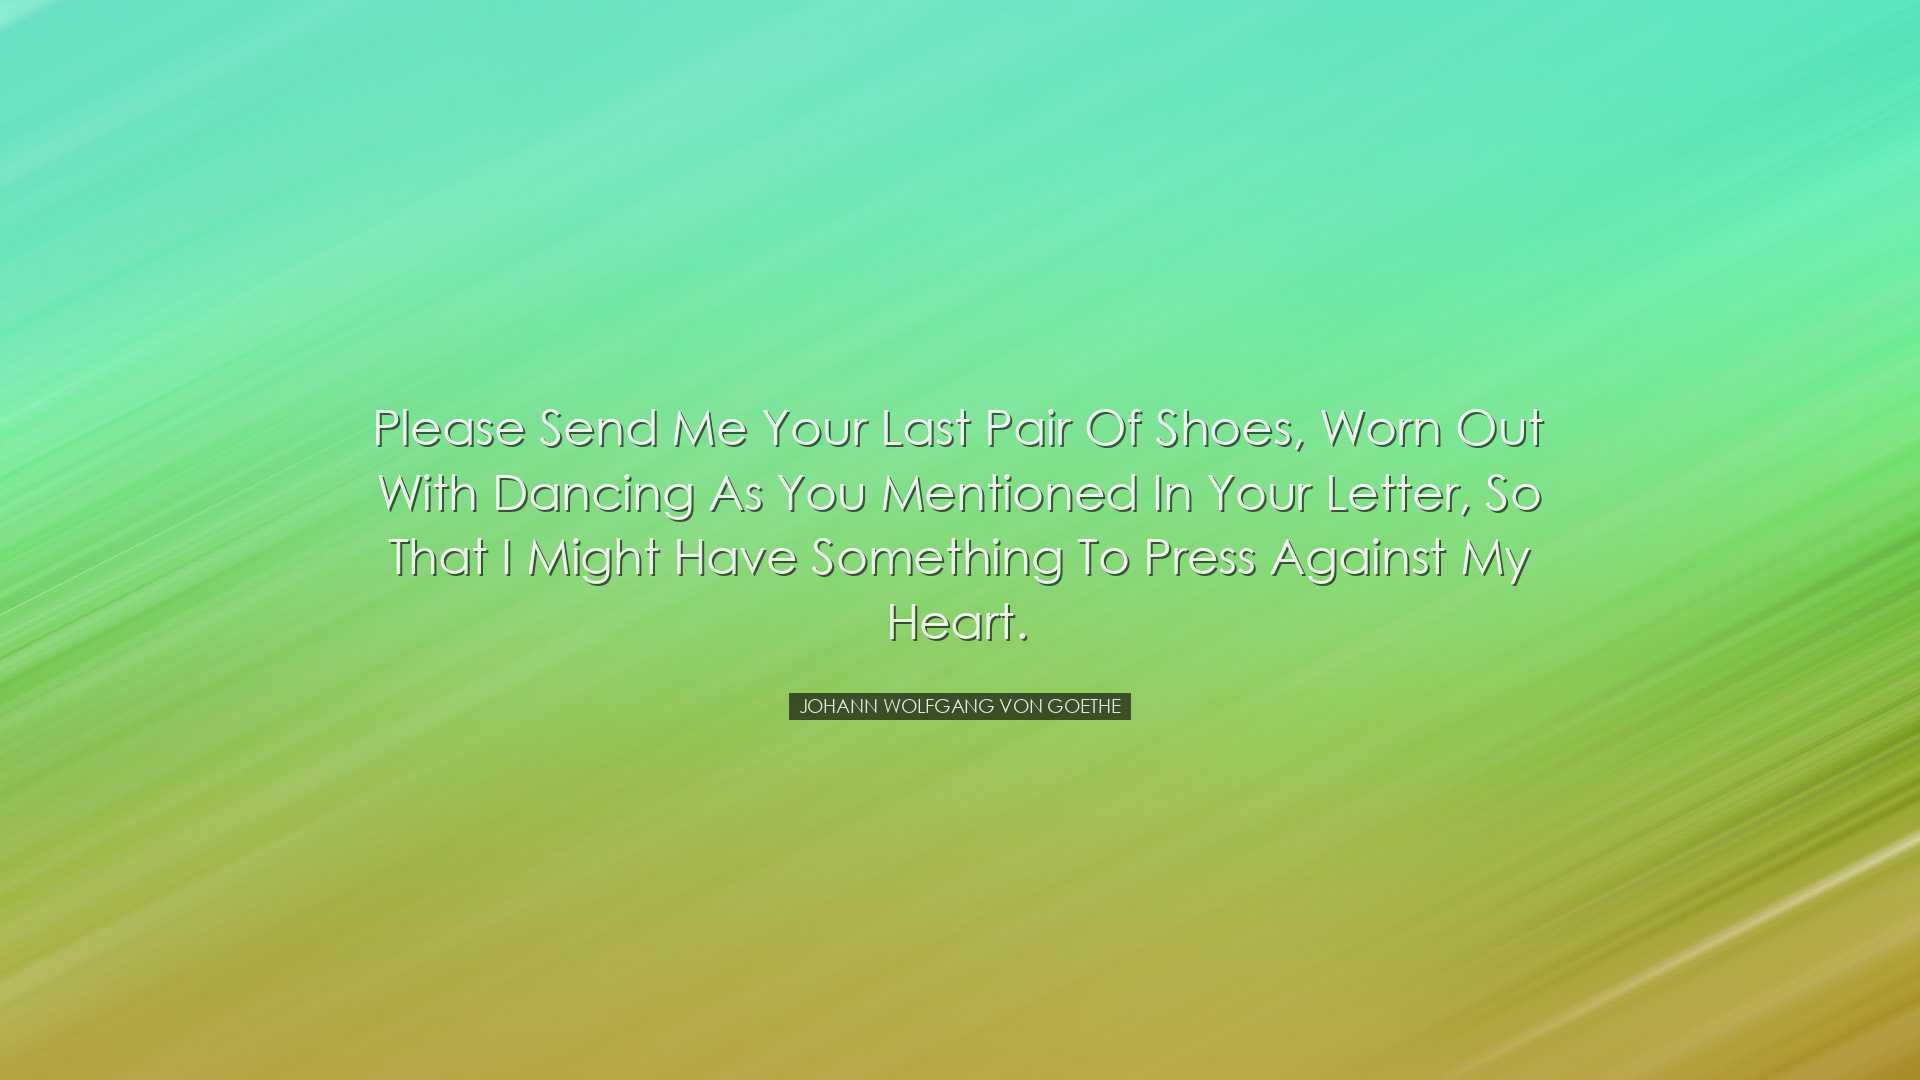 Please send me your last pair of shoes, worn out with dancing as y